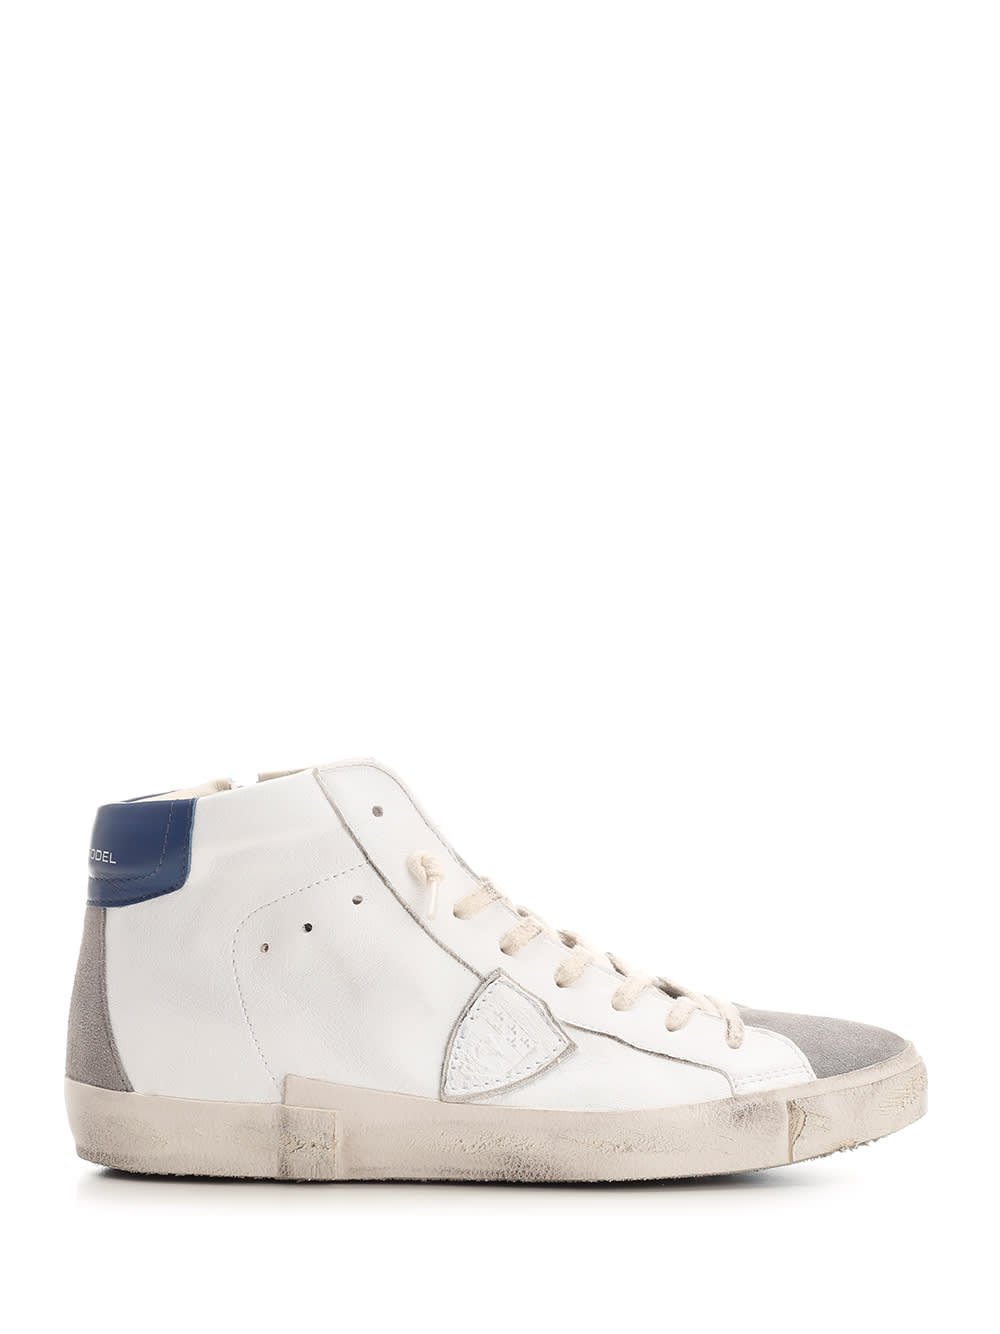 PHILIPPE MODEL PRSX HIGH TOP SNEAKERS